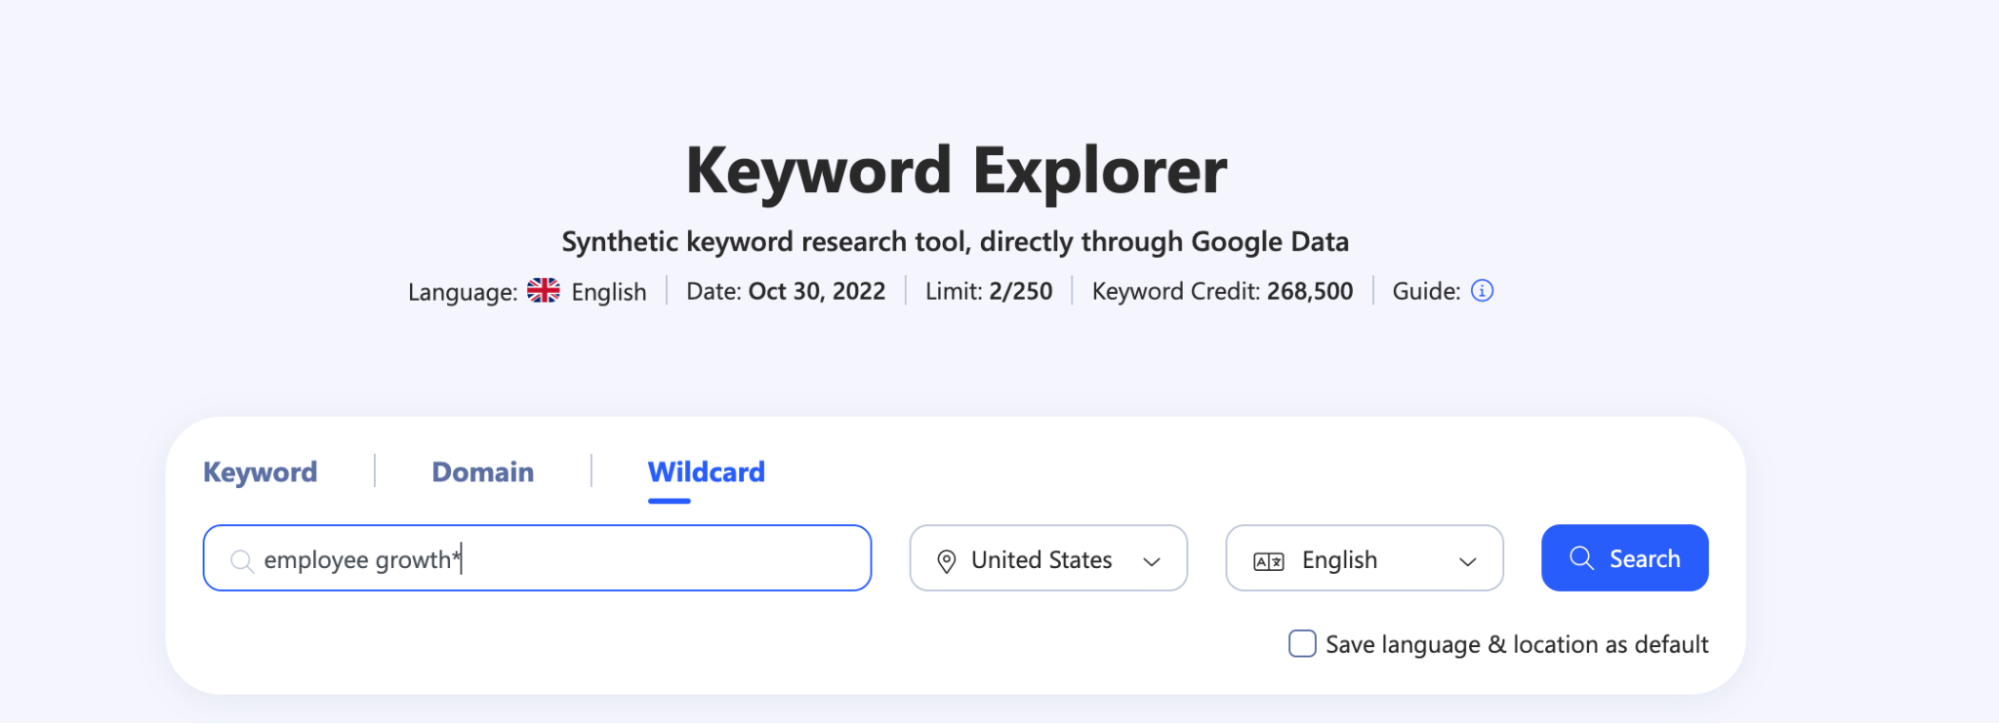 Discover Hidden And New Keywords In Real-time In Keyword Explorer